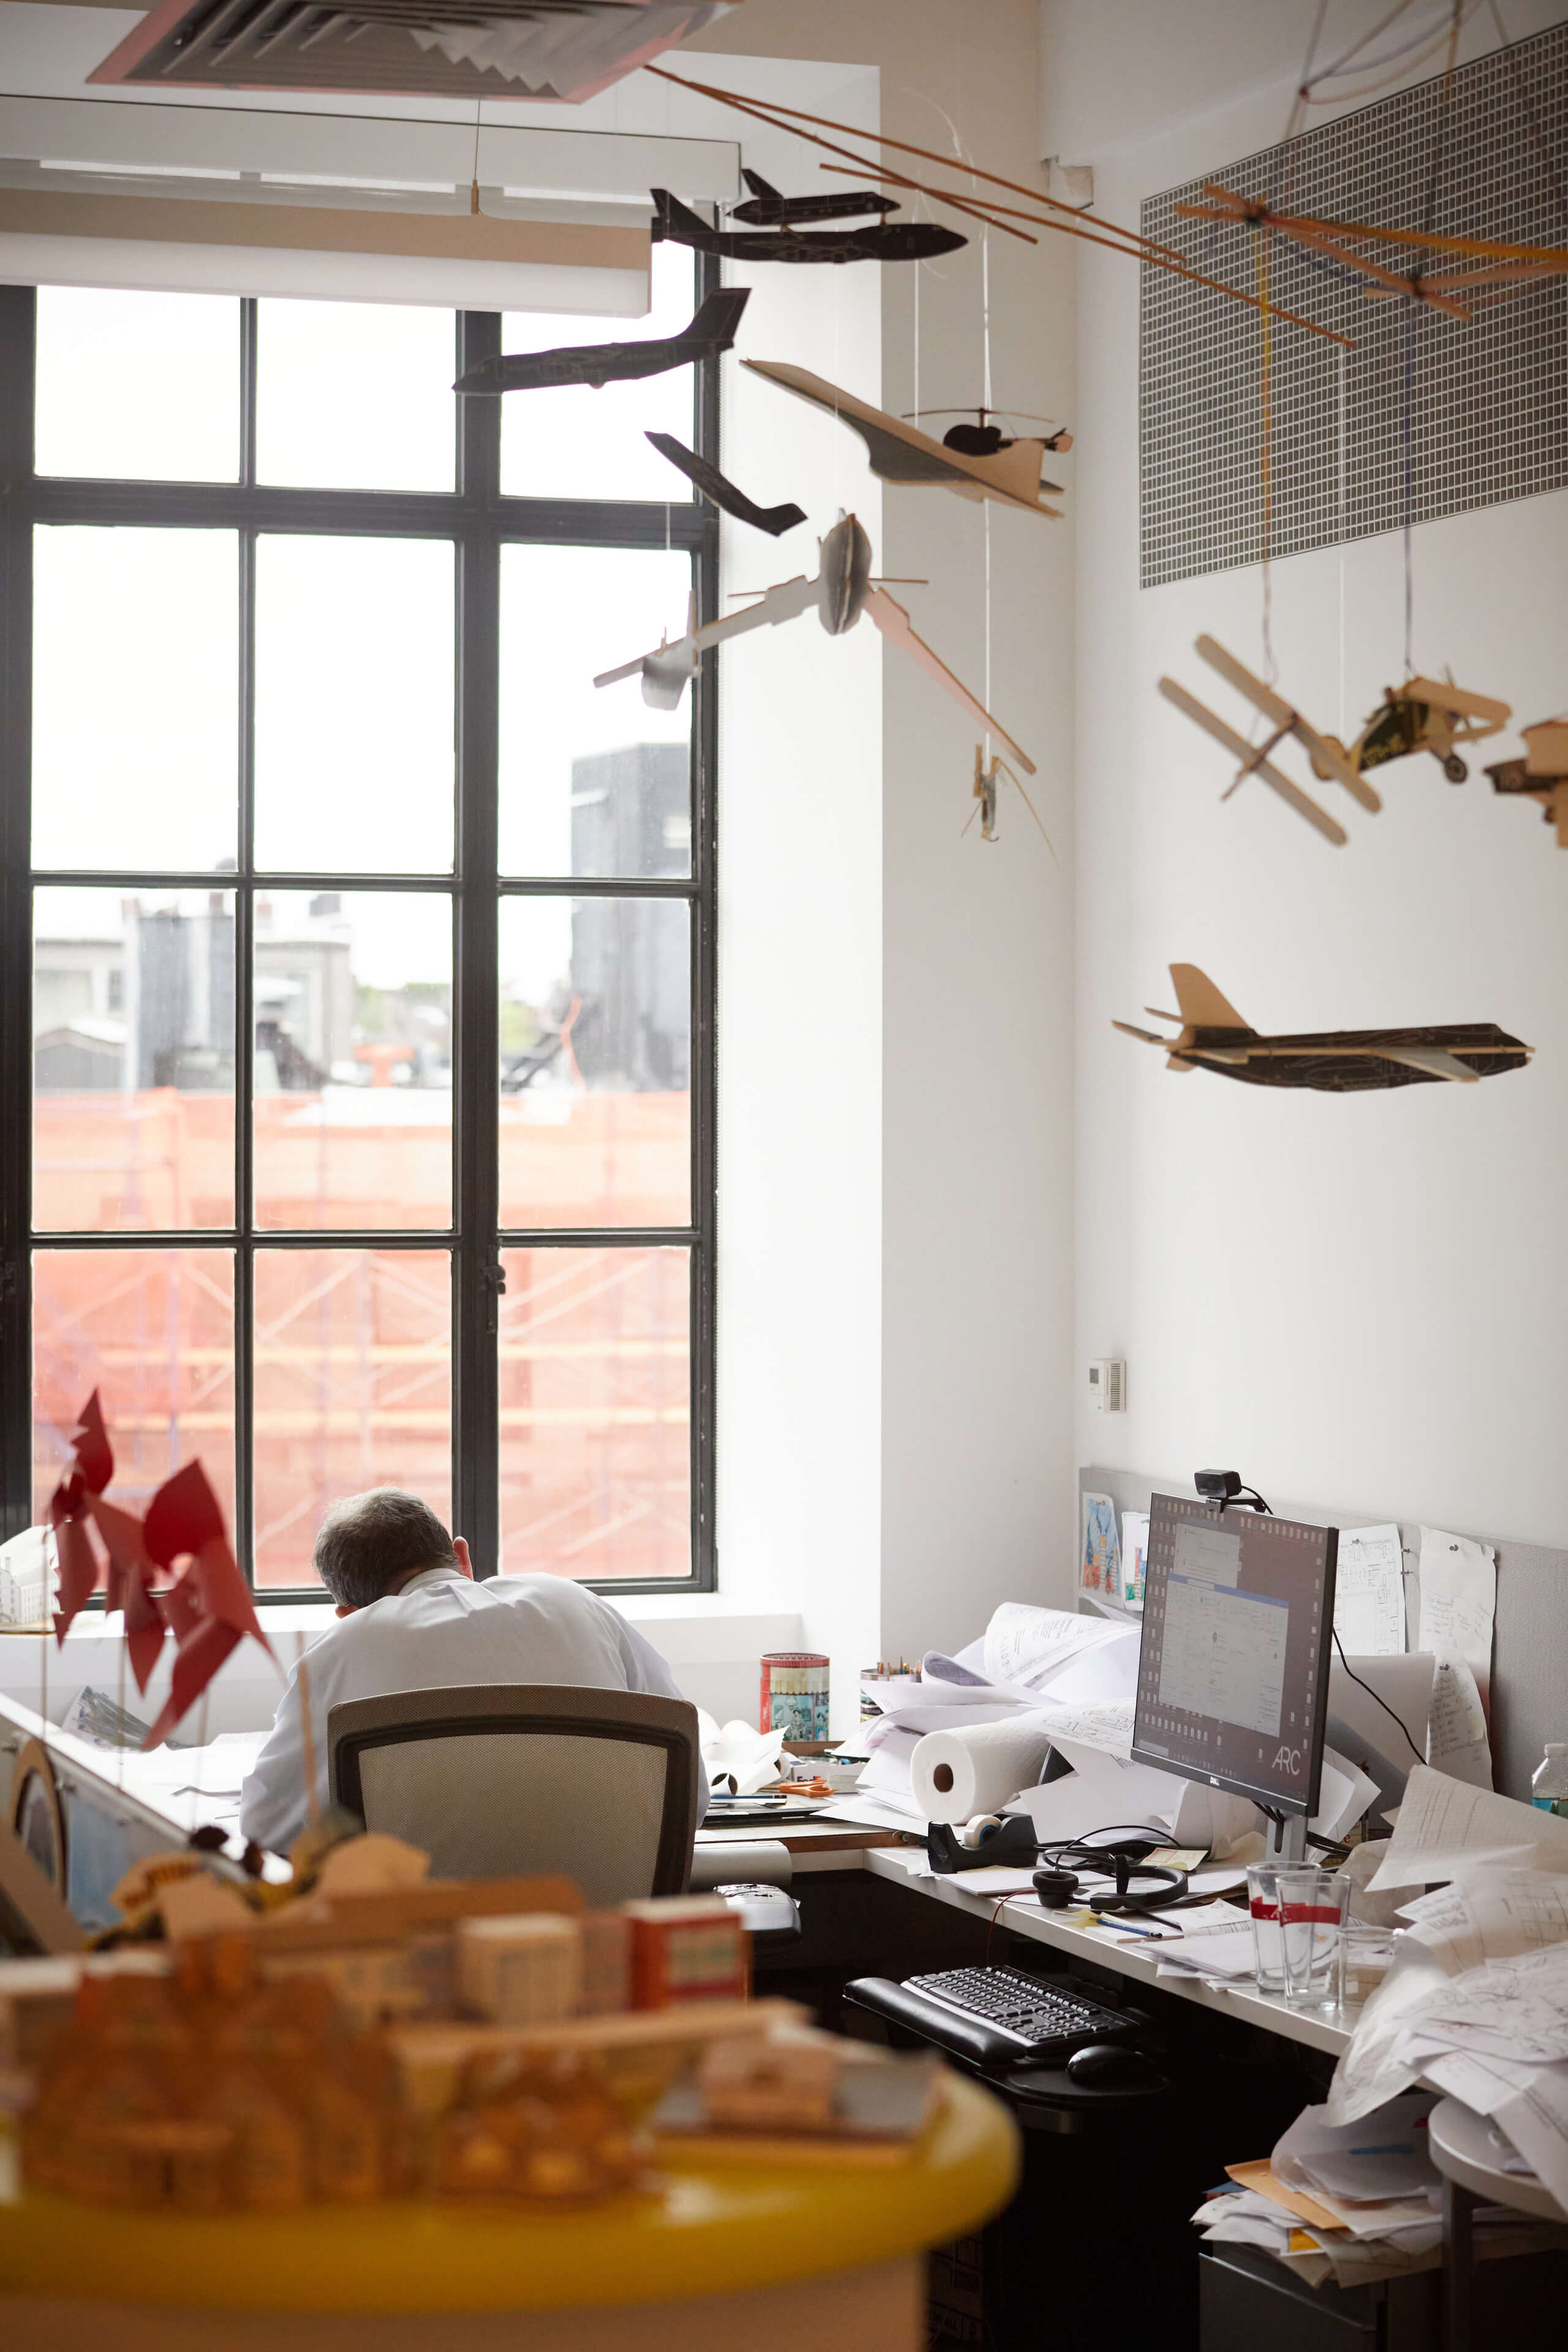 Model airplanes hang from ceiling above team members desk 